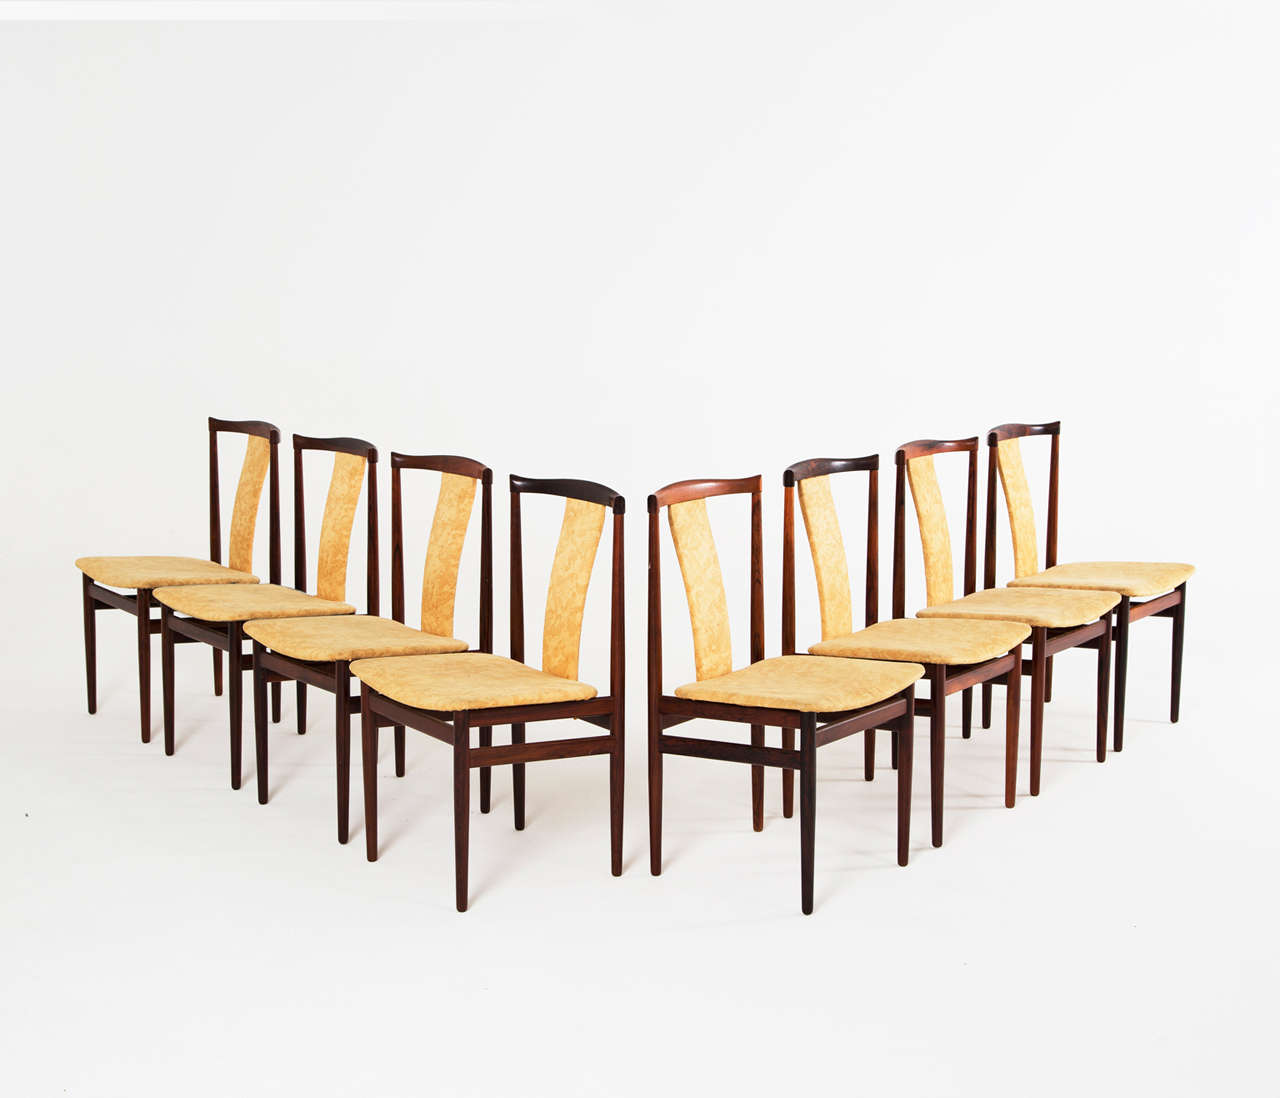 Set of 8 dining chairs, in rosewood and fabric, Denmark 1940s. 

Set of eight very well made Danish solid rosewood dining chairs. The details in these chairs are stunning as seen in the wooden joints and the slightly curved backrest. The upholstery